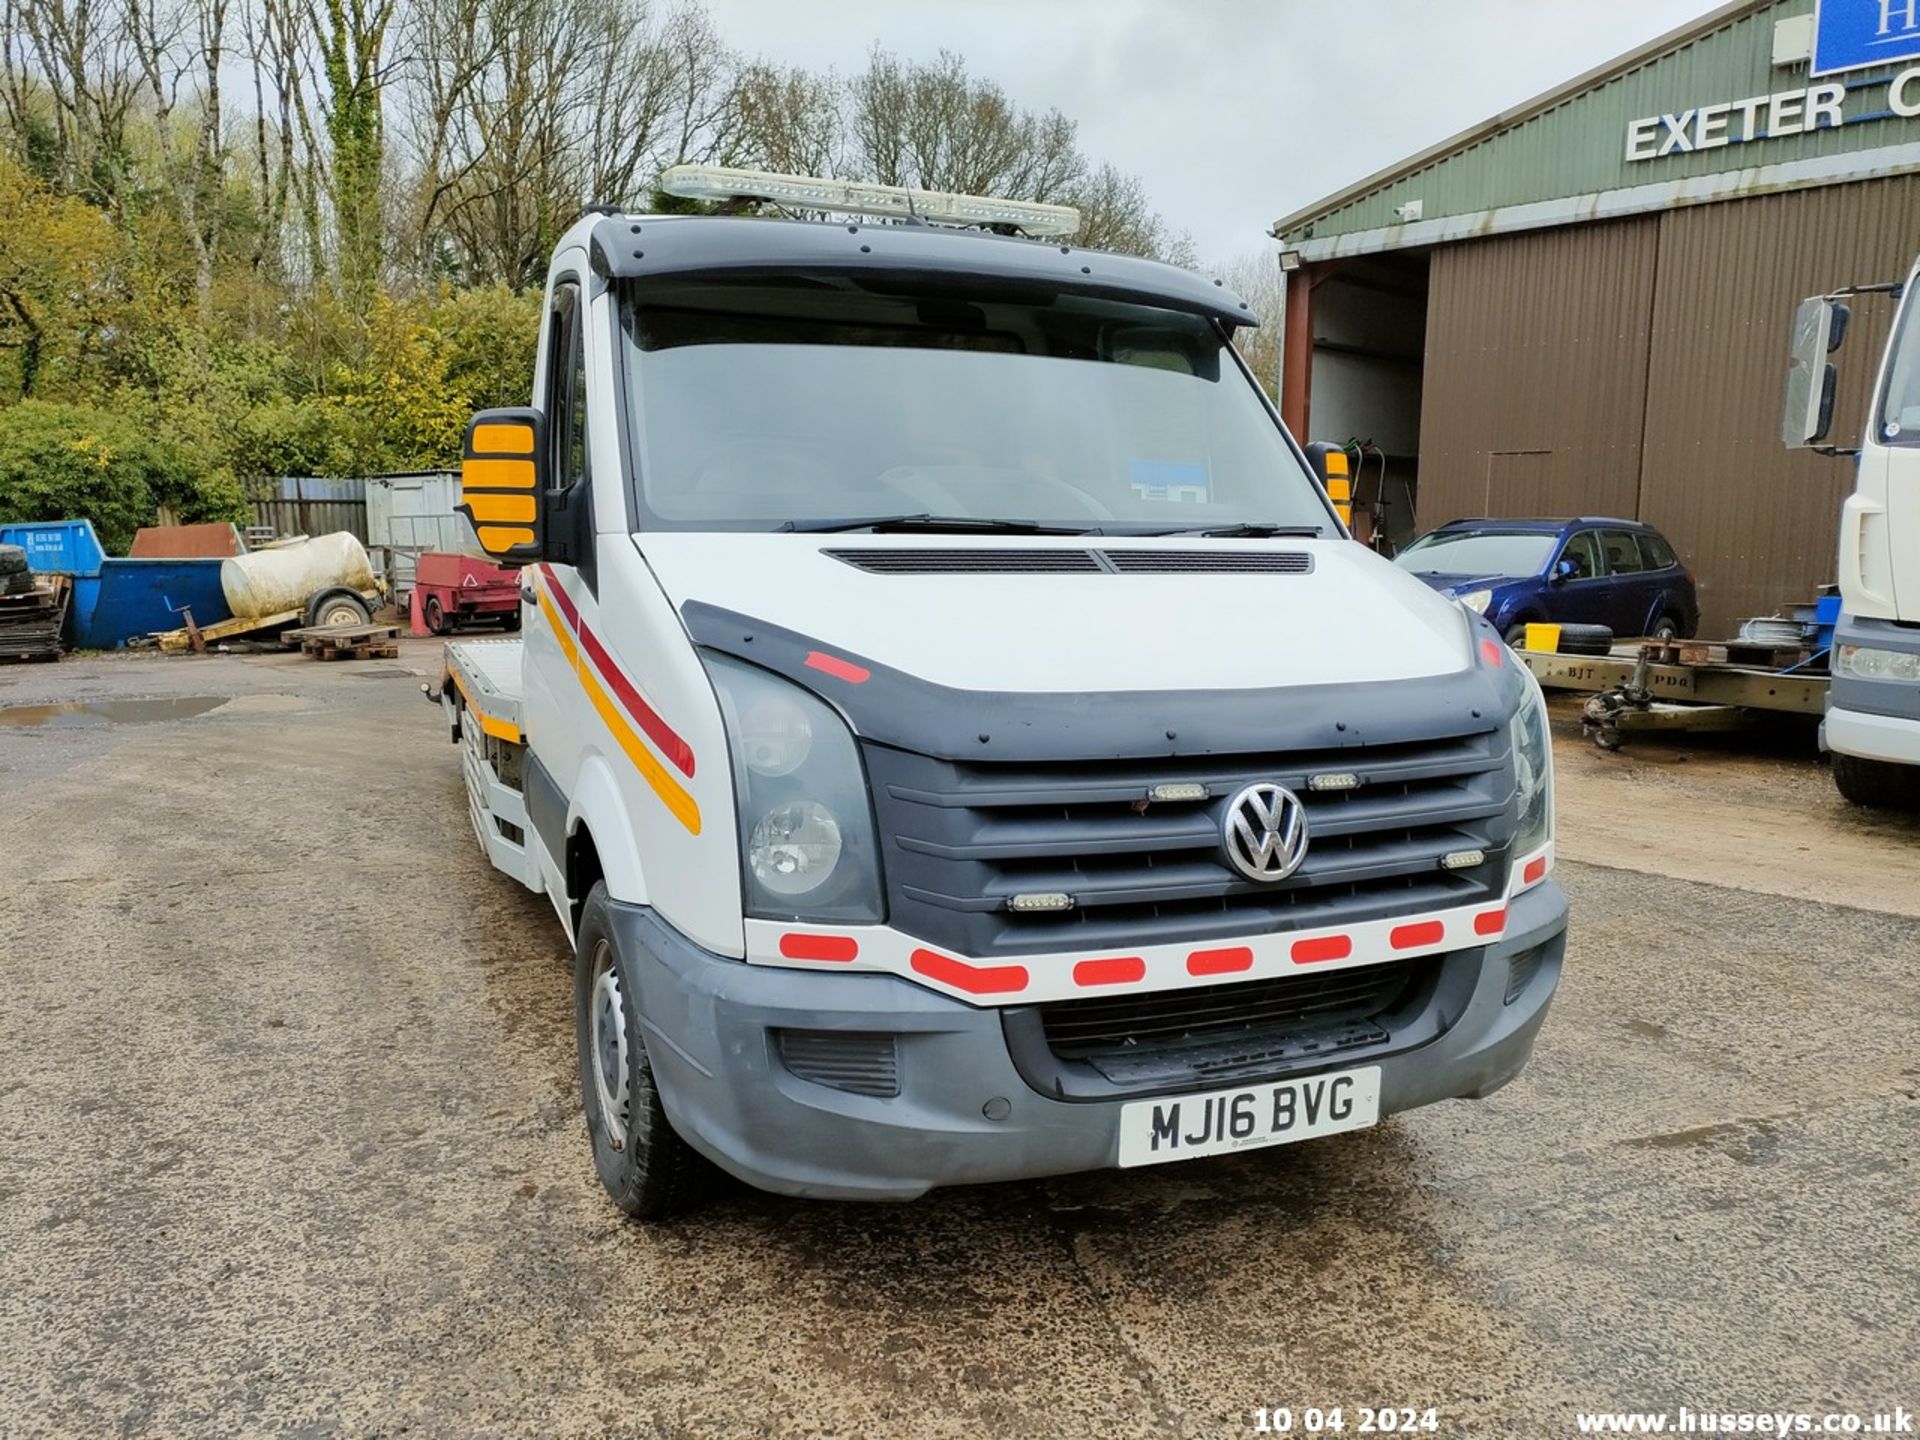 16/16 VOLKSWAGEN CRAFTER CR35 TDI - 1968cc 2dr (White, 146k) - Image 8 of 52